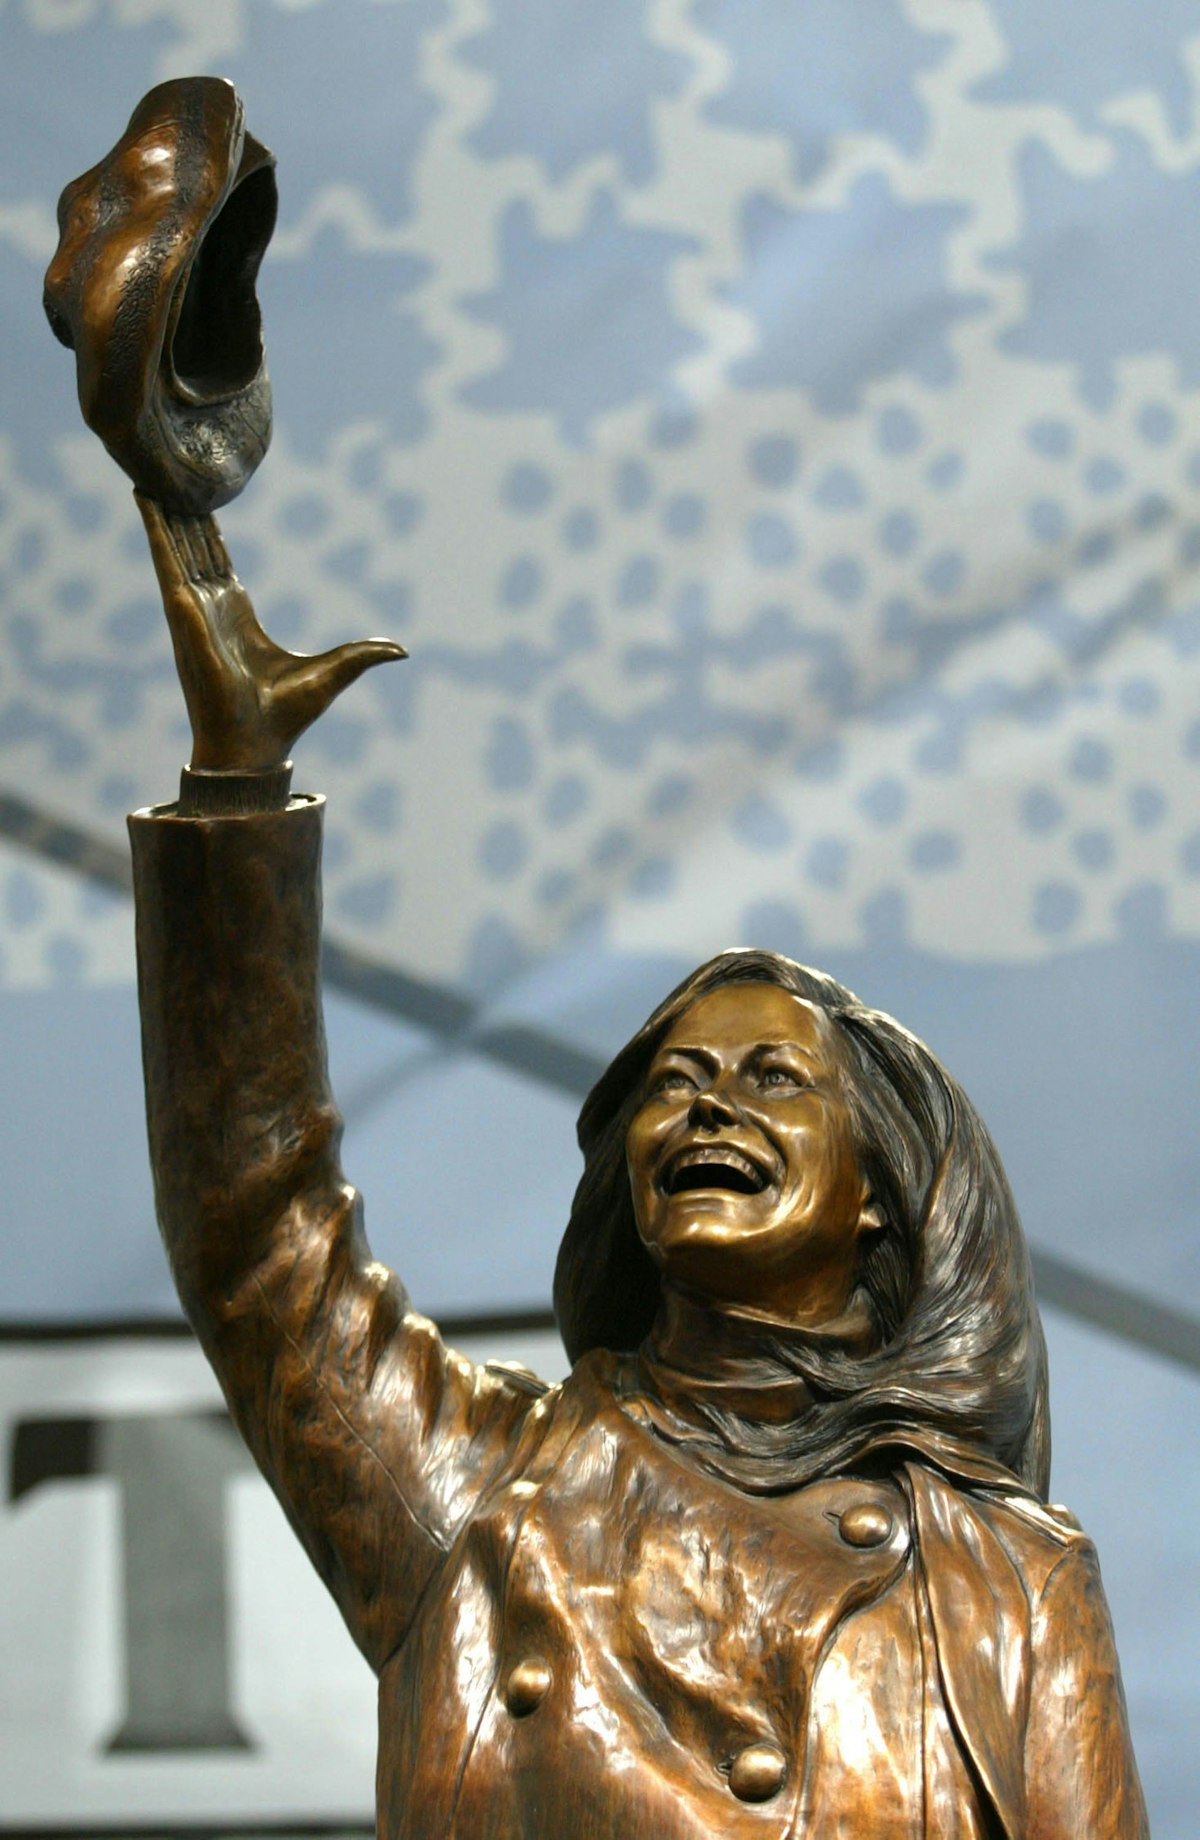 405090 10: The Statue Honoring Mary Tyler Moore Was Unveiled May 8, 2002 In Minneapolis, Mn. The Statue Depicts Moore Tossing Her Tam (Hat) From The Opening Credits Of The "The Mary Tyler Moore Show".  (Photo By Mike Ekern/Getty Images)